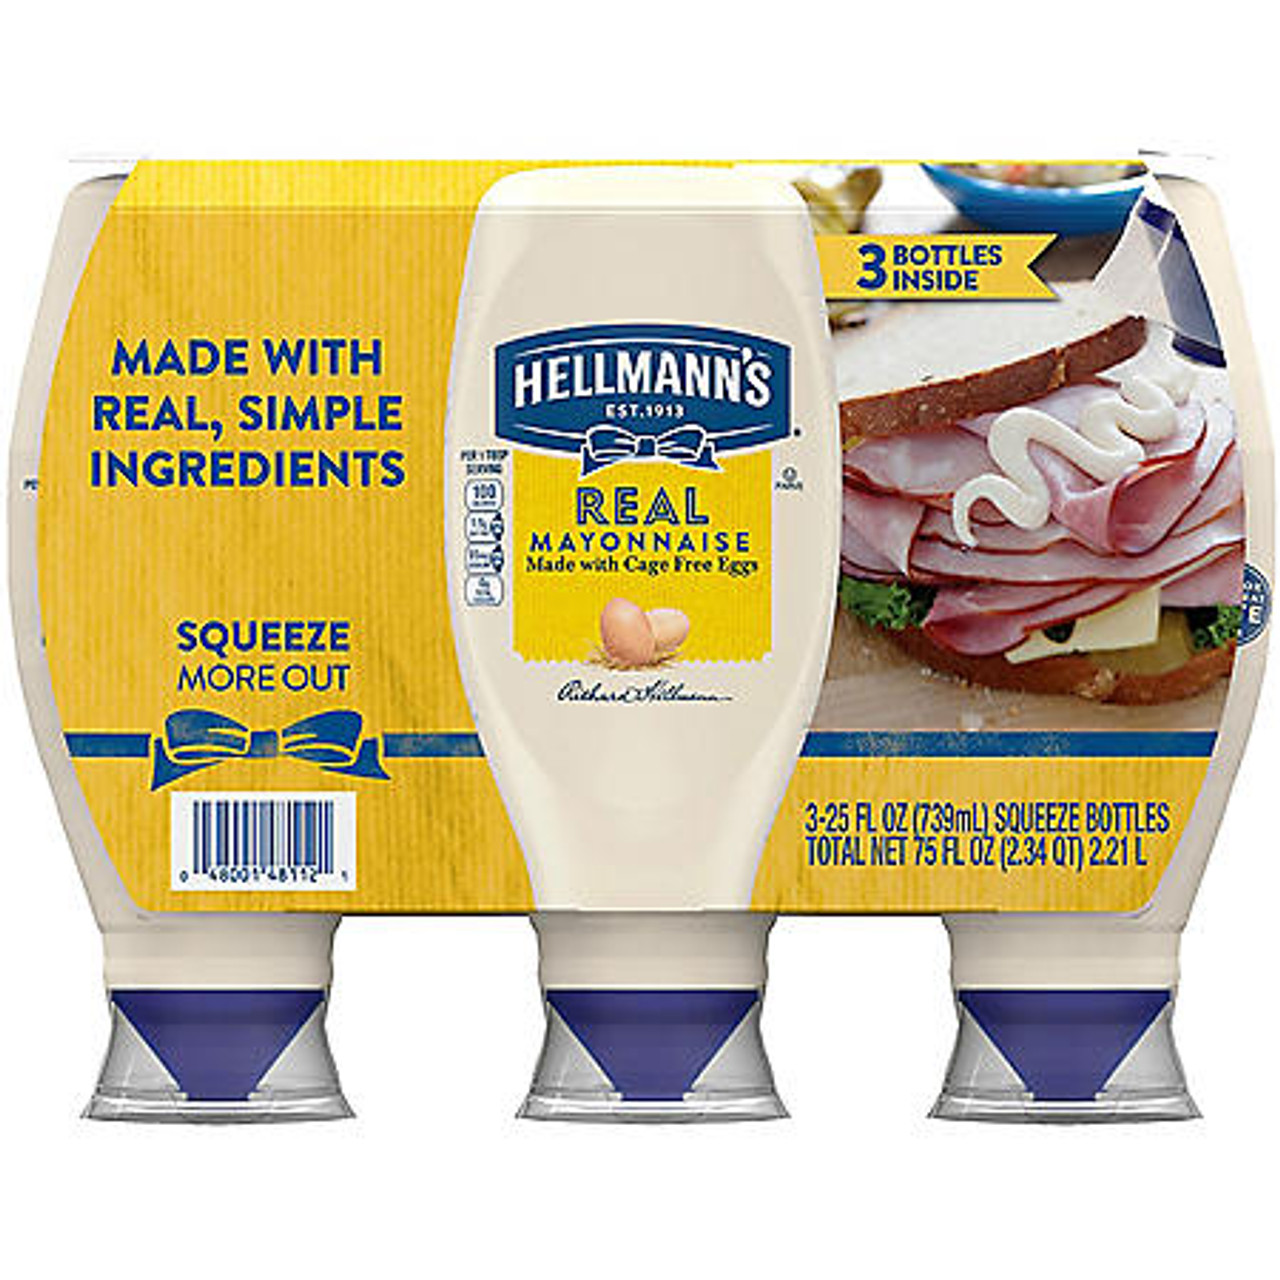 Hellmann's Real Mayonnaise (25 oz., 3 pk.) - [From 62.00 - Choose pk Qty ] - *Ships from Miami